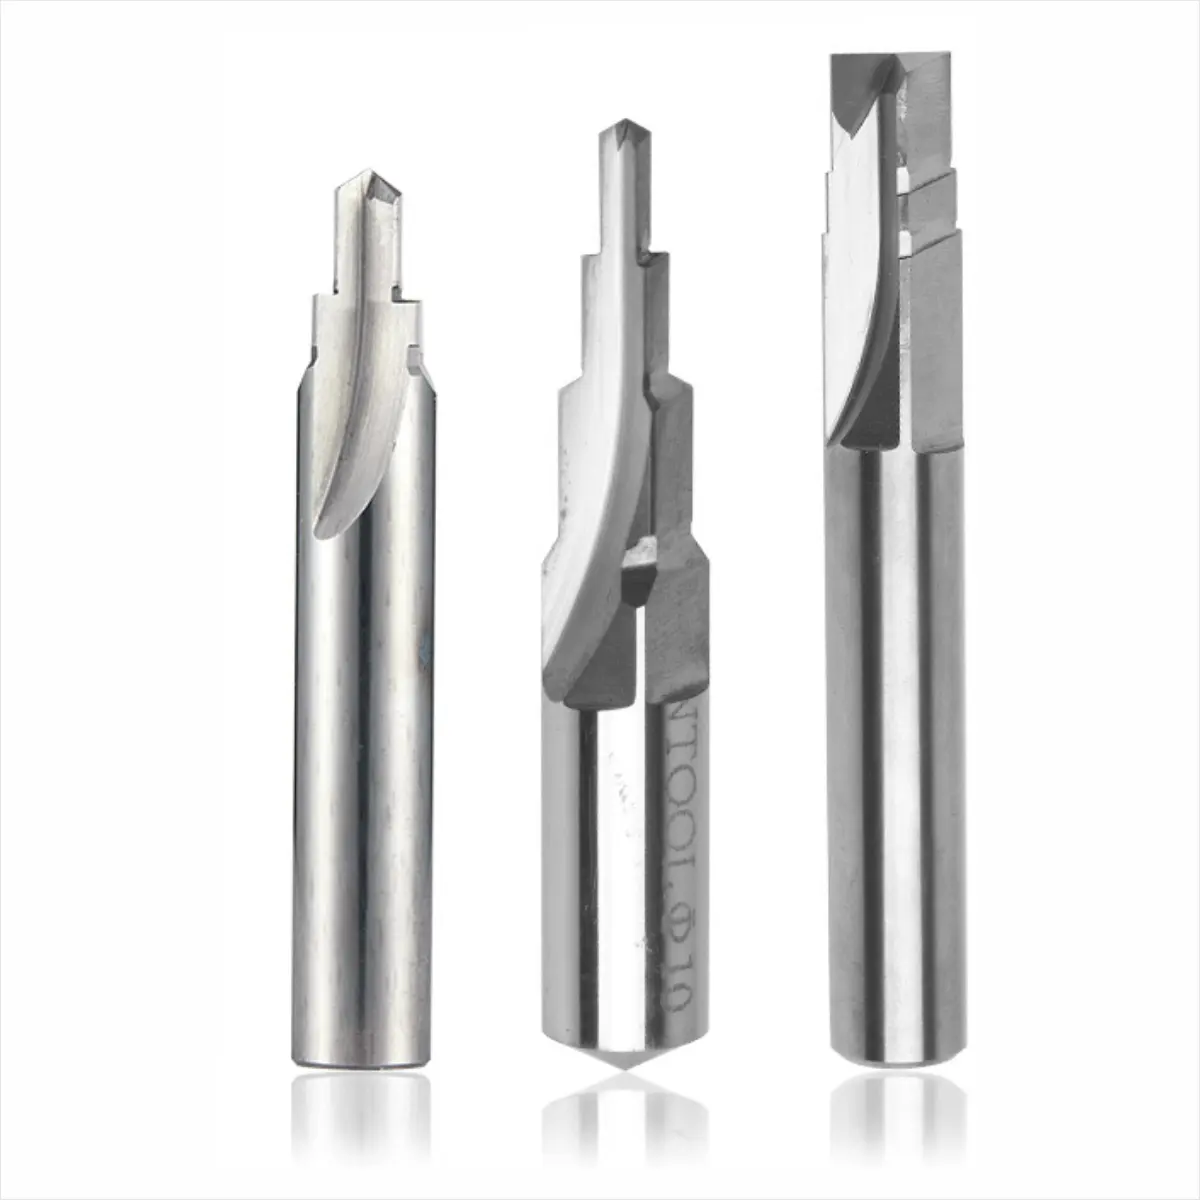 customized non-standard cutters Various reamers for CNC machining Four slot reamers Tungsten steel step forming reamers